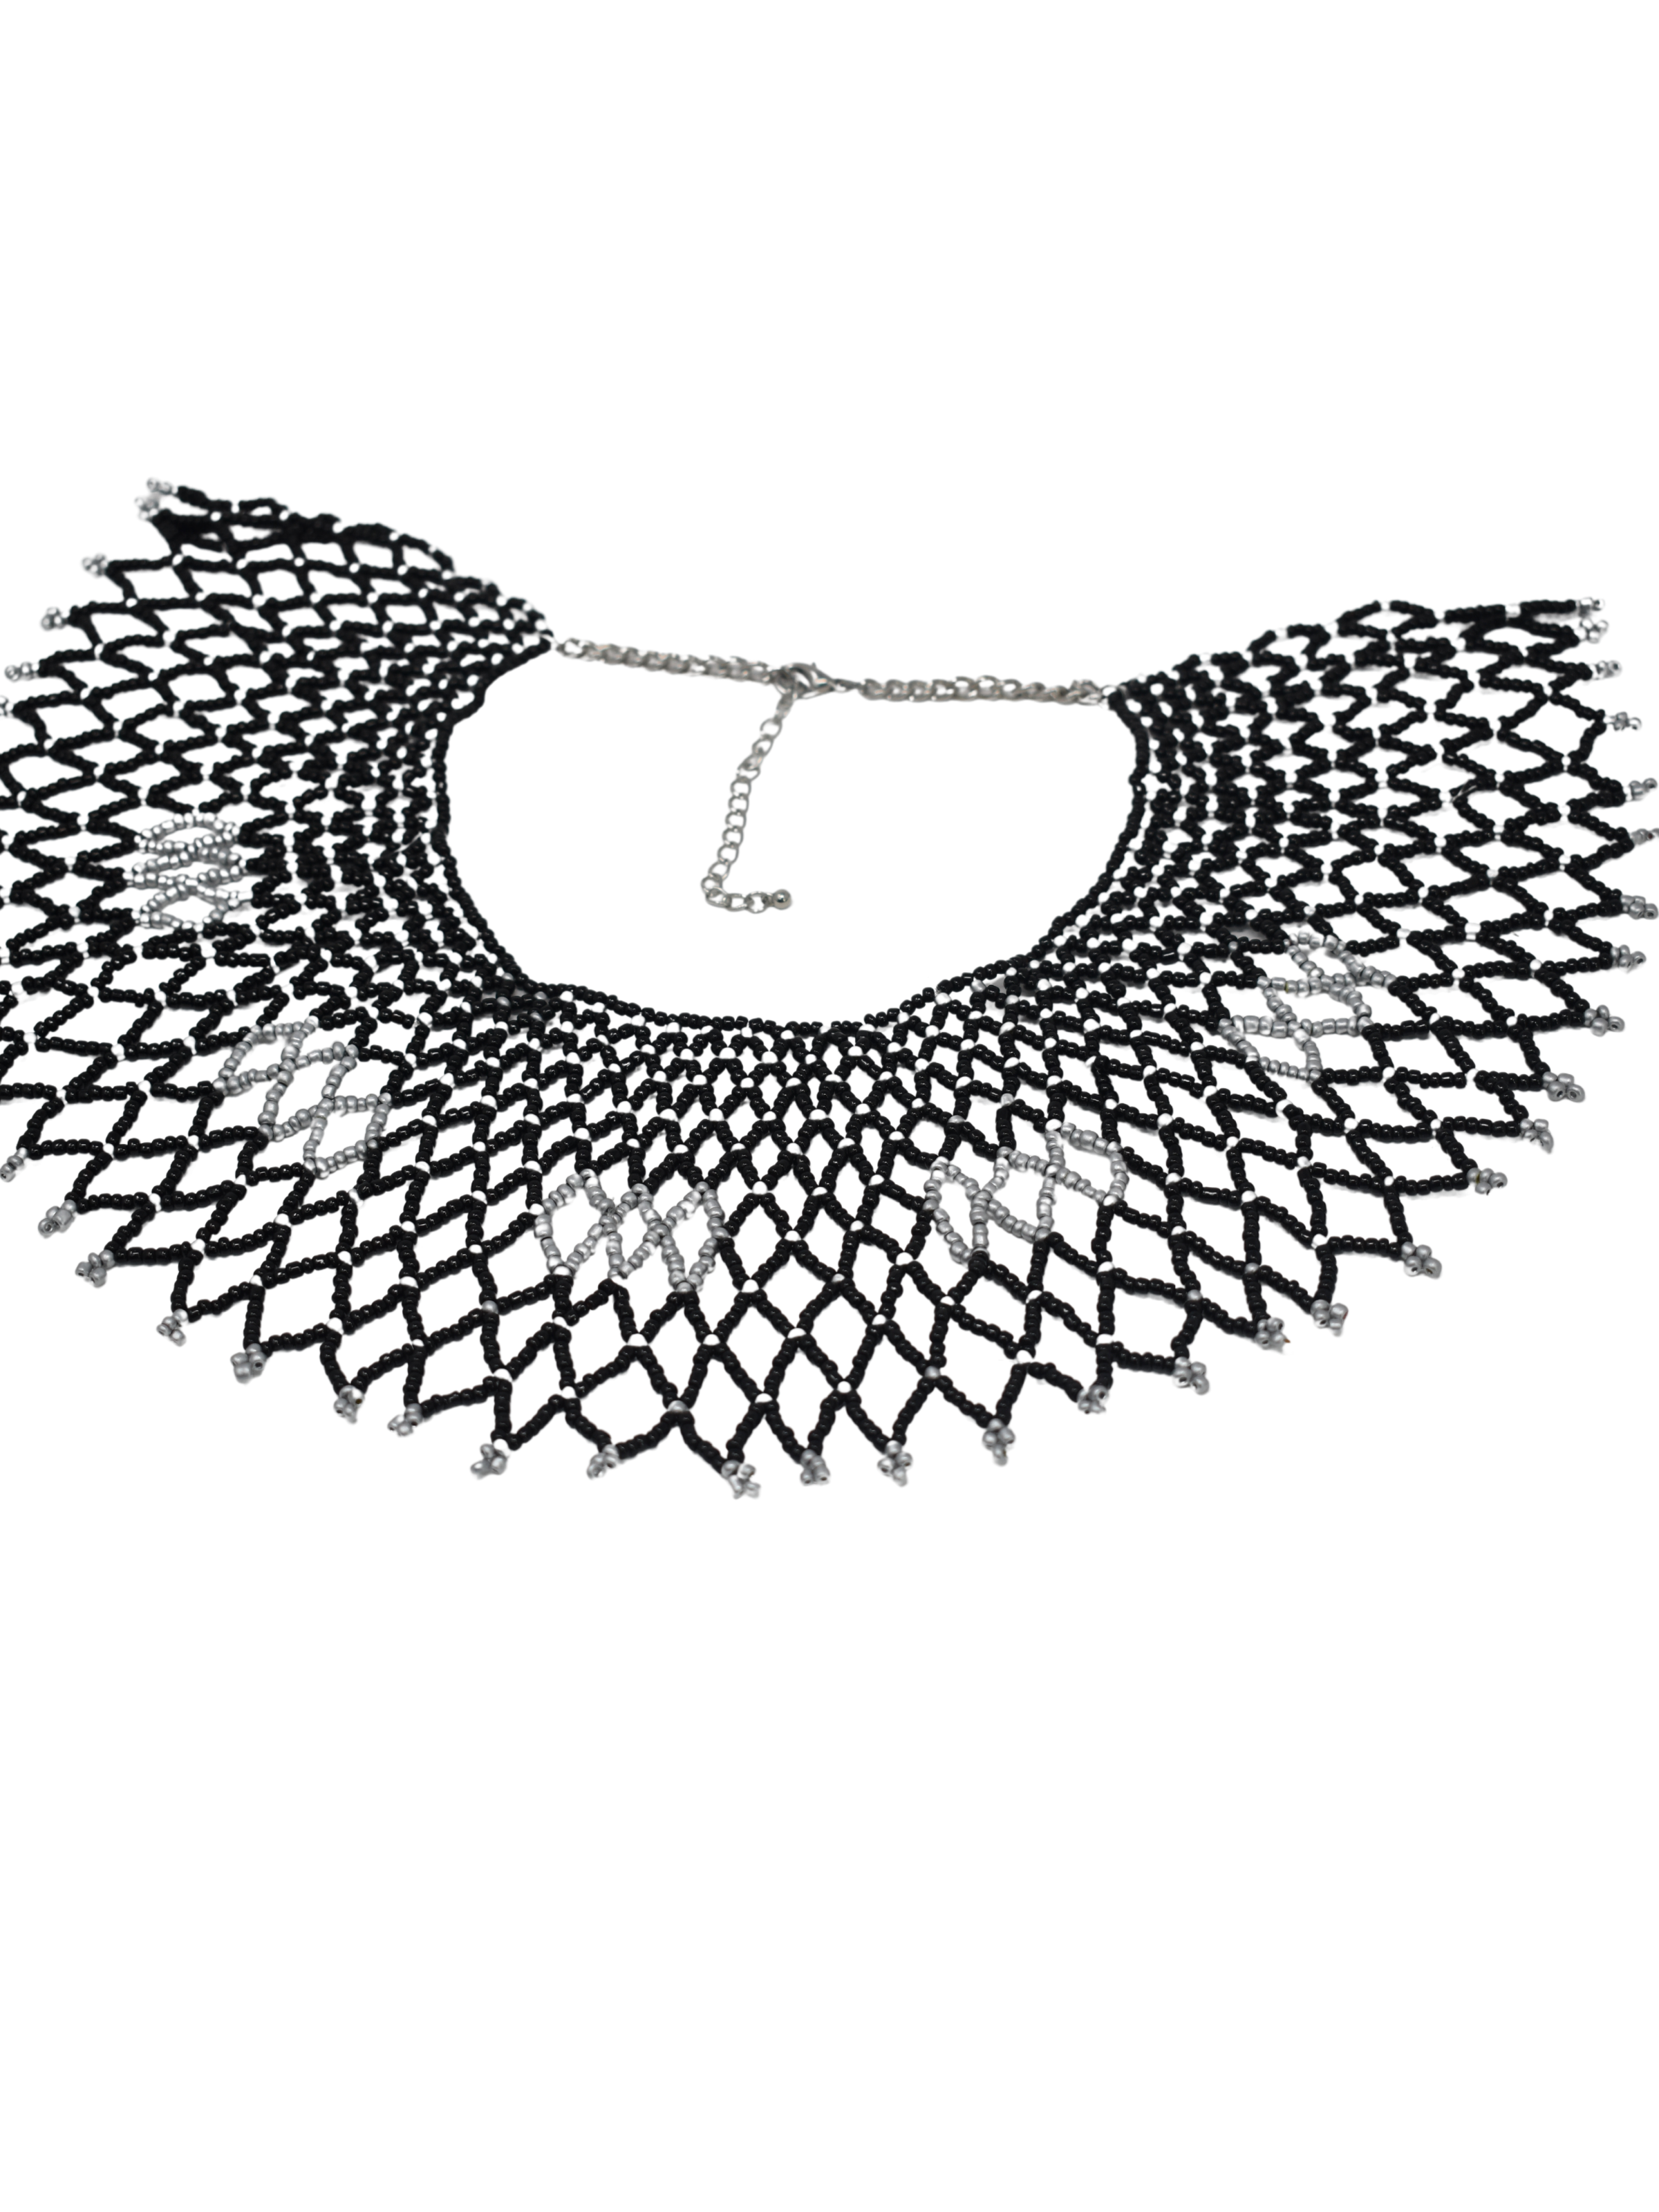 Our Nicola black and silver dainty bib styled necklace will have you feeling like royalty on any given day of the week.